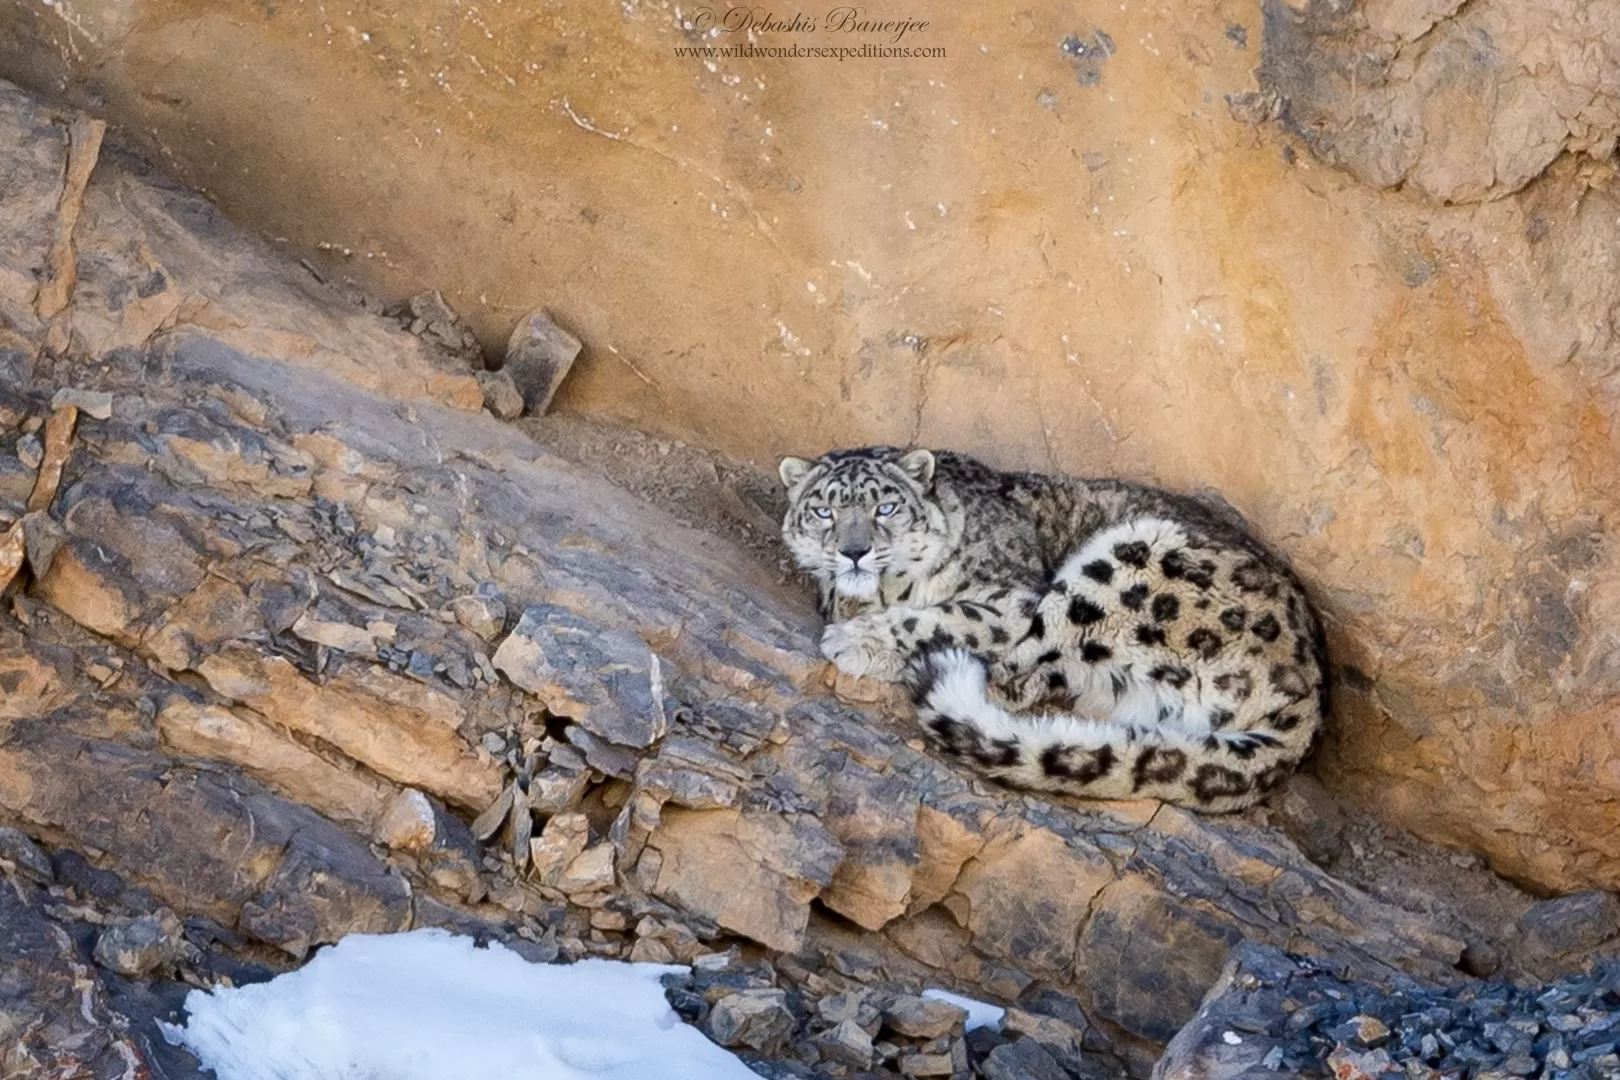 snow leopard: Himachal home to 75 snow leopards, says five-year